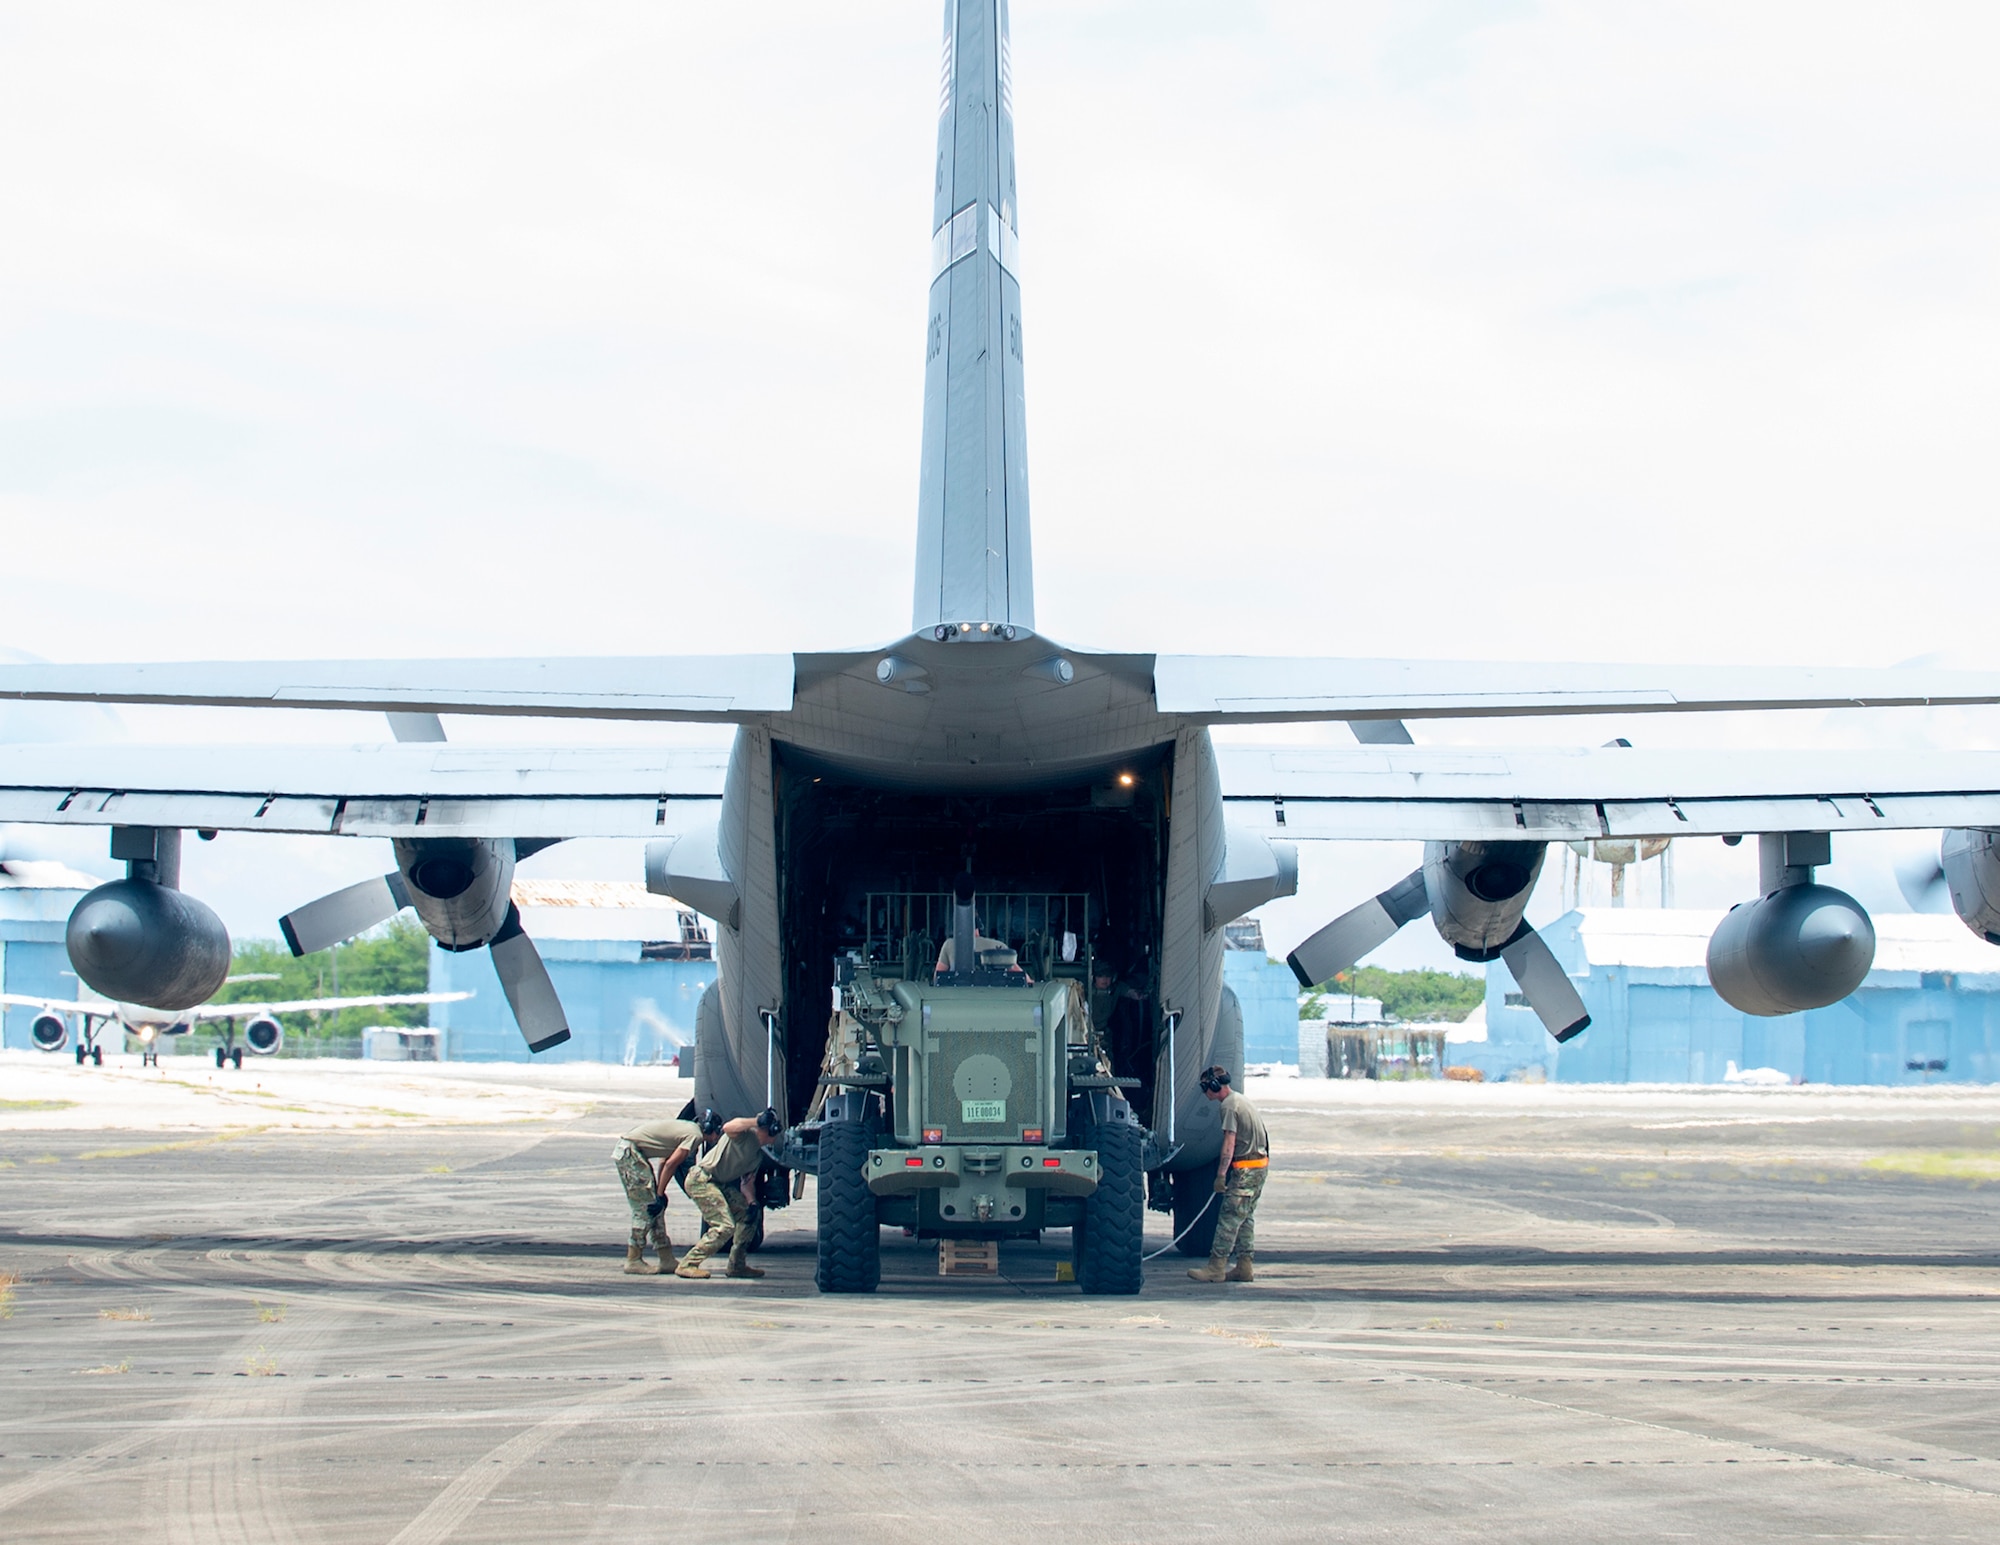 U.S. Airmen from the 123rd Contingency Response Group, Kentucky Air National Guard, loads cargo onto a C-130 Hercules from the 133rd Airlift Wing, in Aguadilla, Puerto Rico, Aug. 18, 2021.